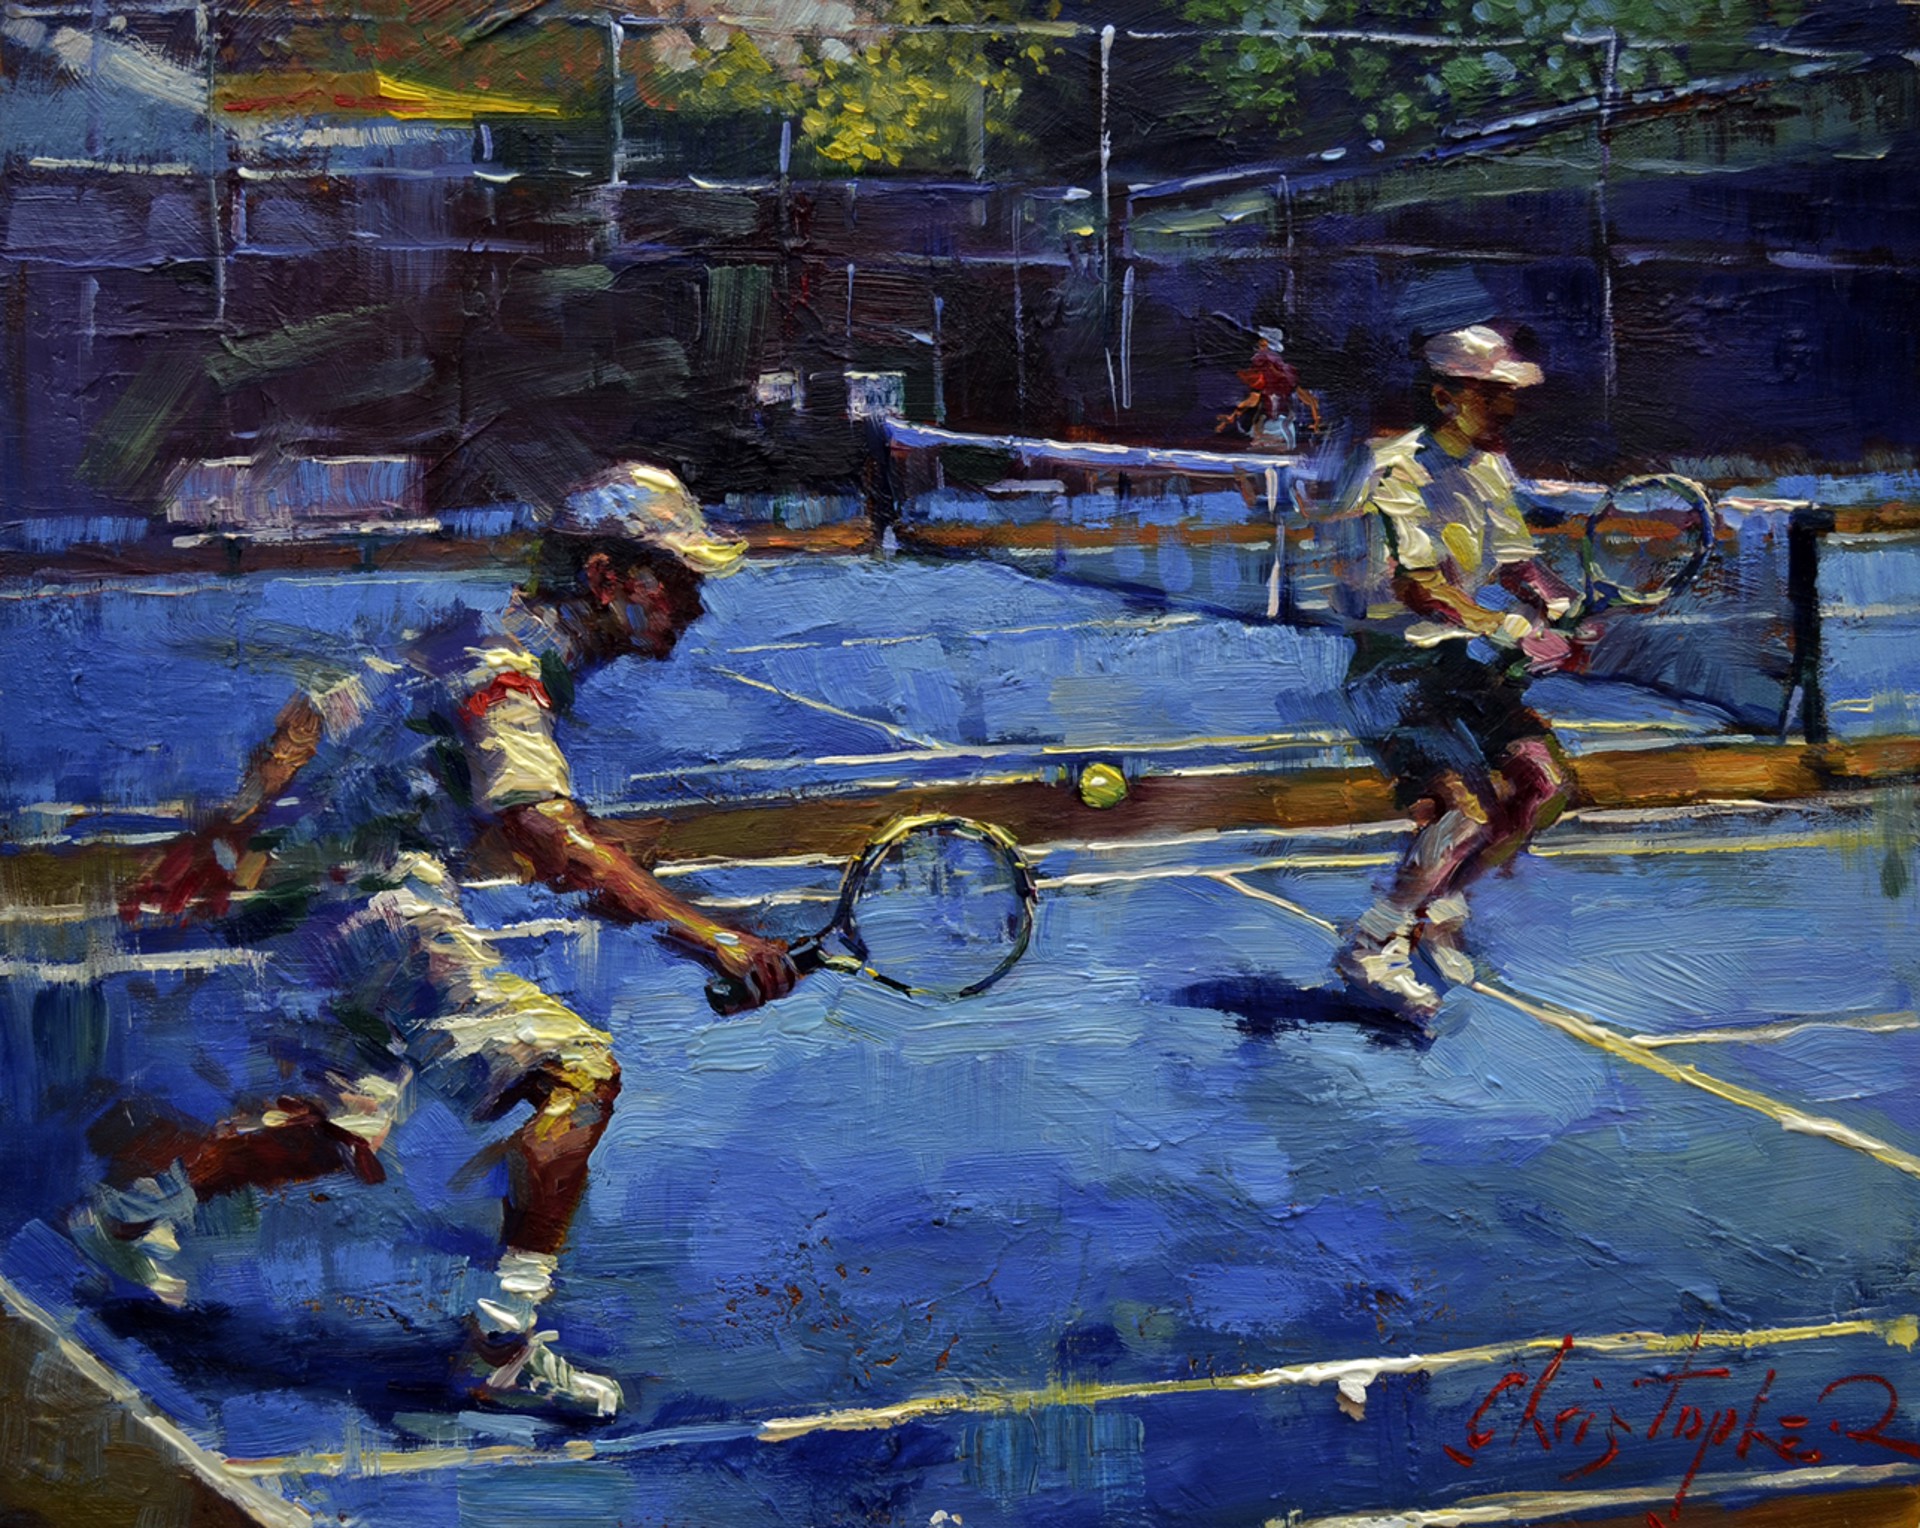 Untitled (Tennis) by Christopher M